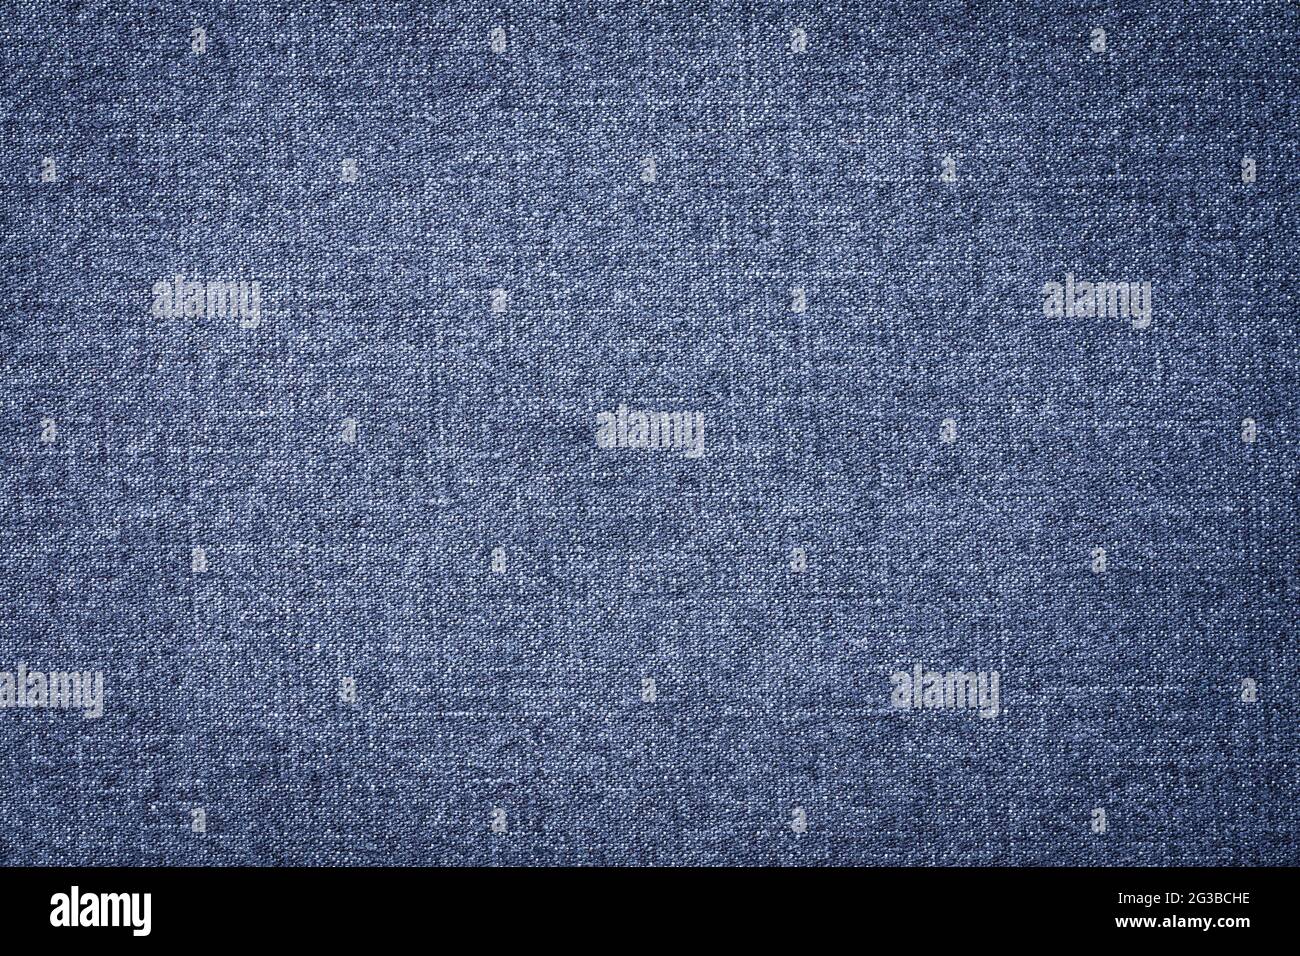 Gray Jeans Fabric Background And Texture For Artwork Design Stock Photo ...